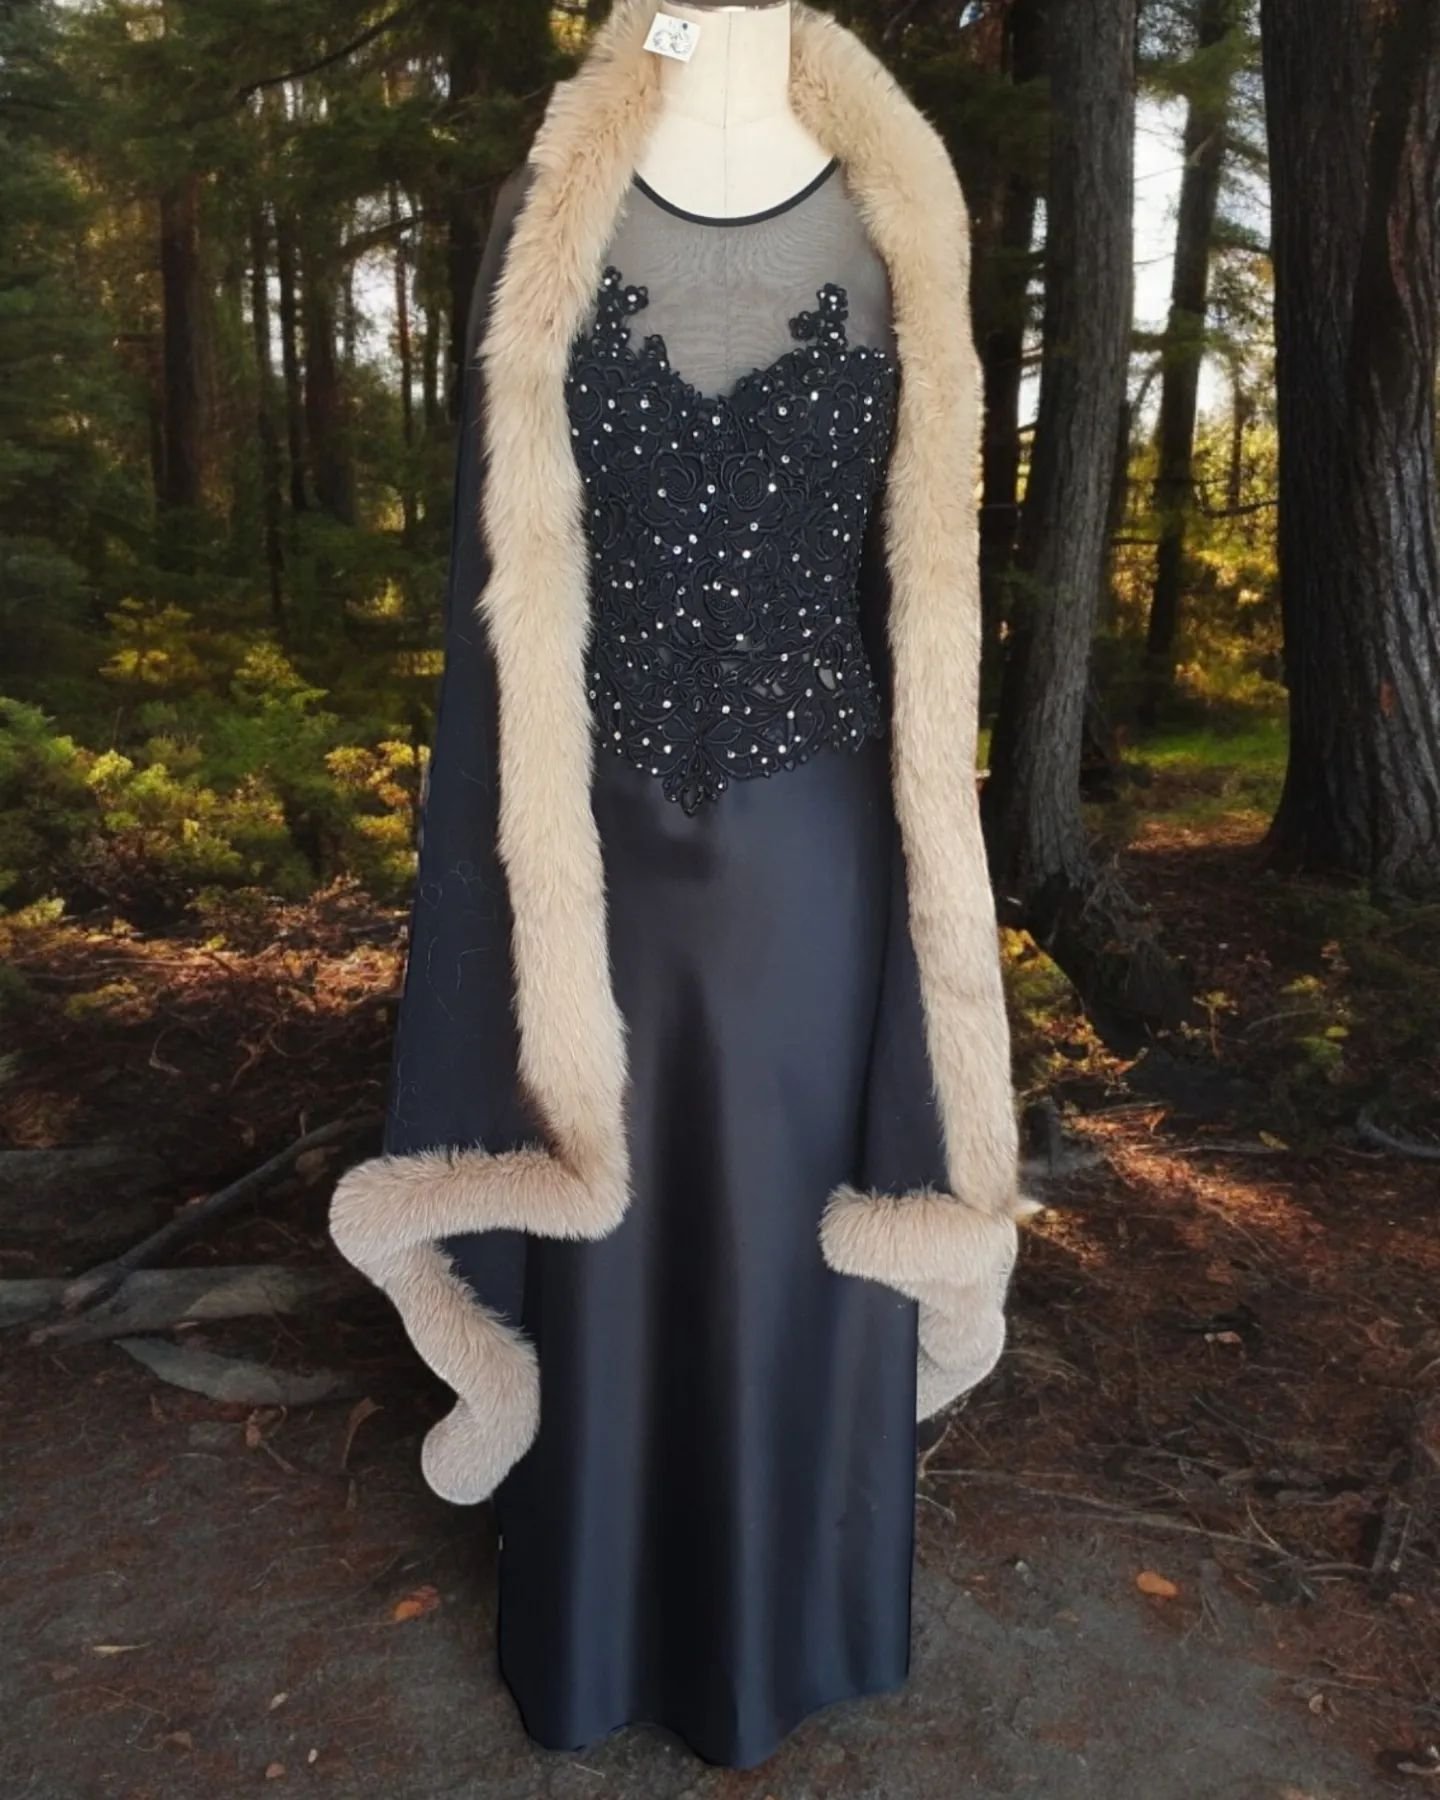 Outfit of the Day🖤✨️

Rabbit Fur Shoal | One Size : $89

Mr K Evening Dress | Size 12 : $199

Cellini Black Heels | Size 38 : Was $69, Now $34.50

Silver Stud Earrings | $29

All Ballgowns with a red sticker are 25% off!

#ootd #outfitoftheday #pert